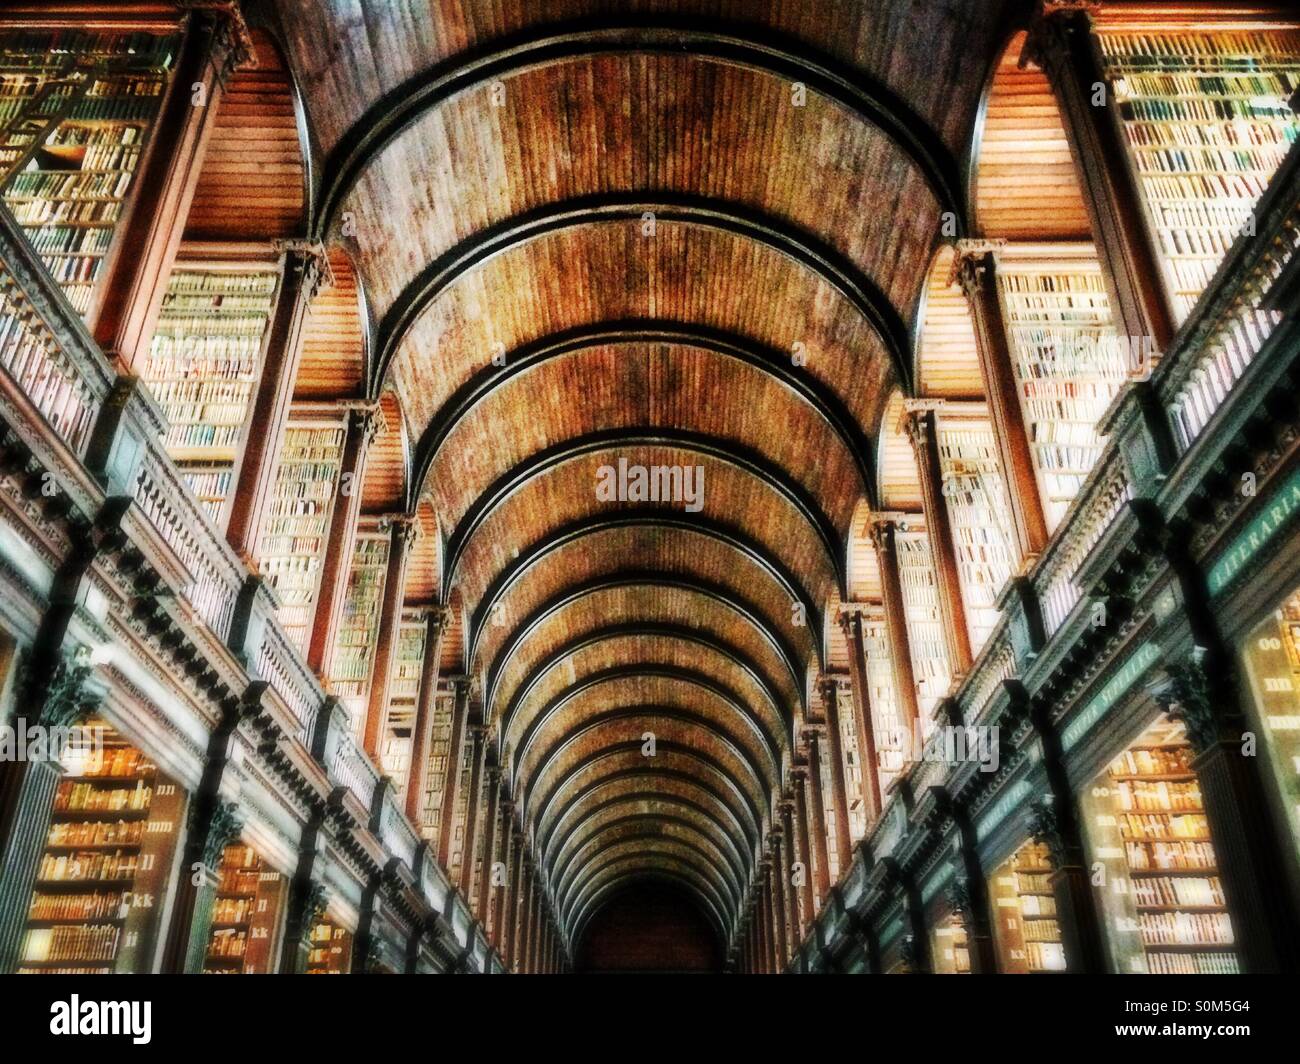 The Old Library Long Room at Trinity College Dublin, Ireland Stock Photo